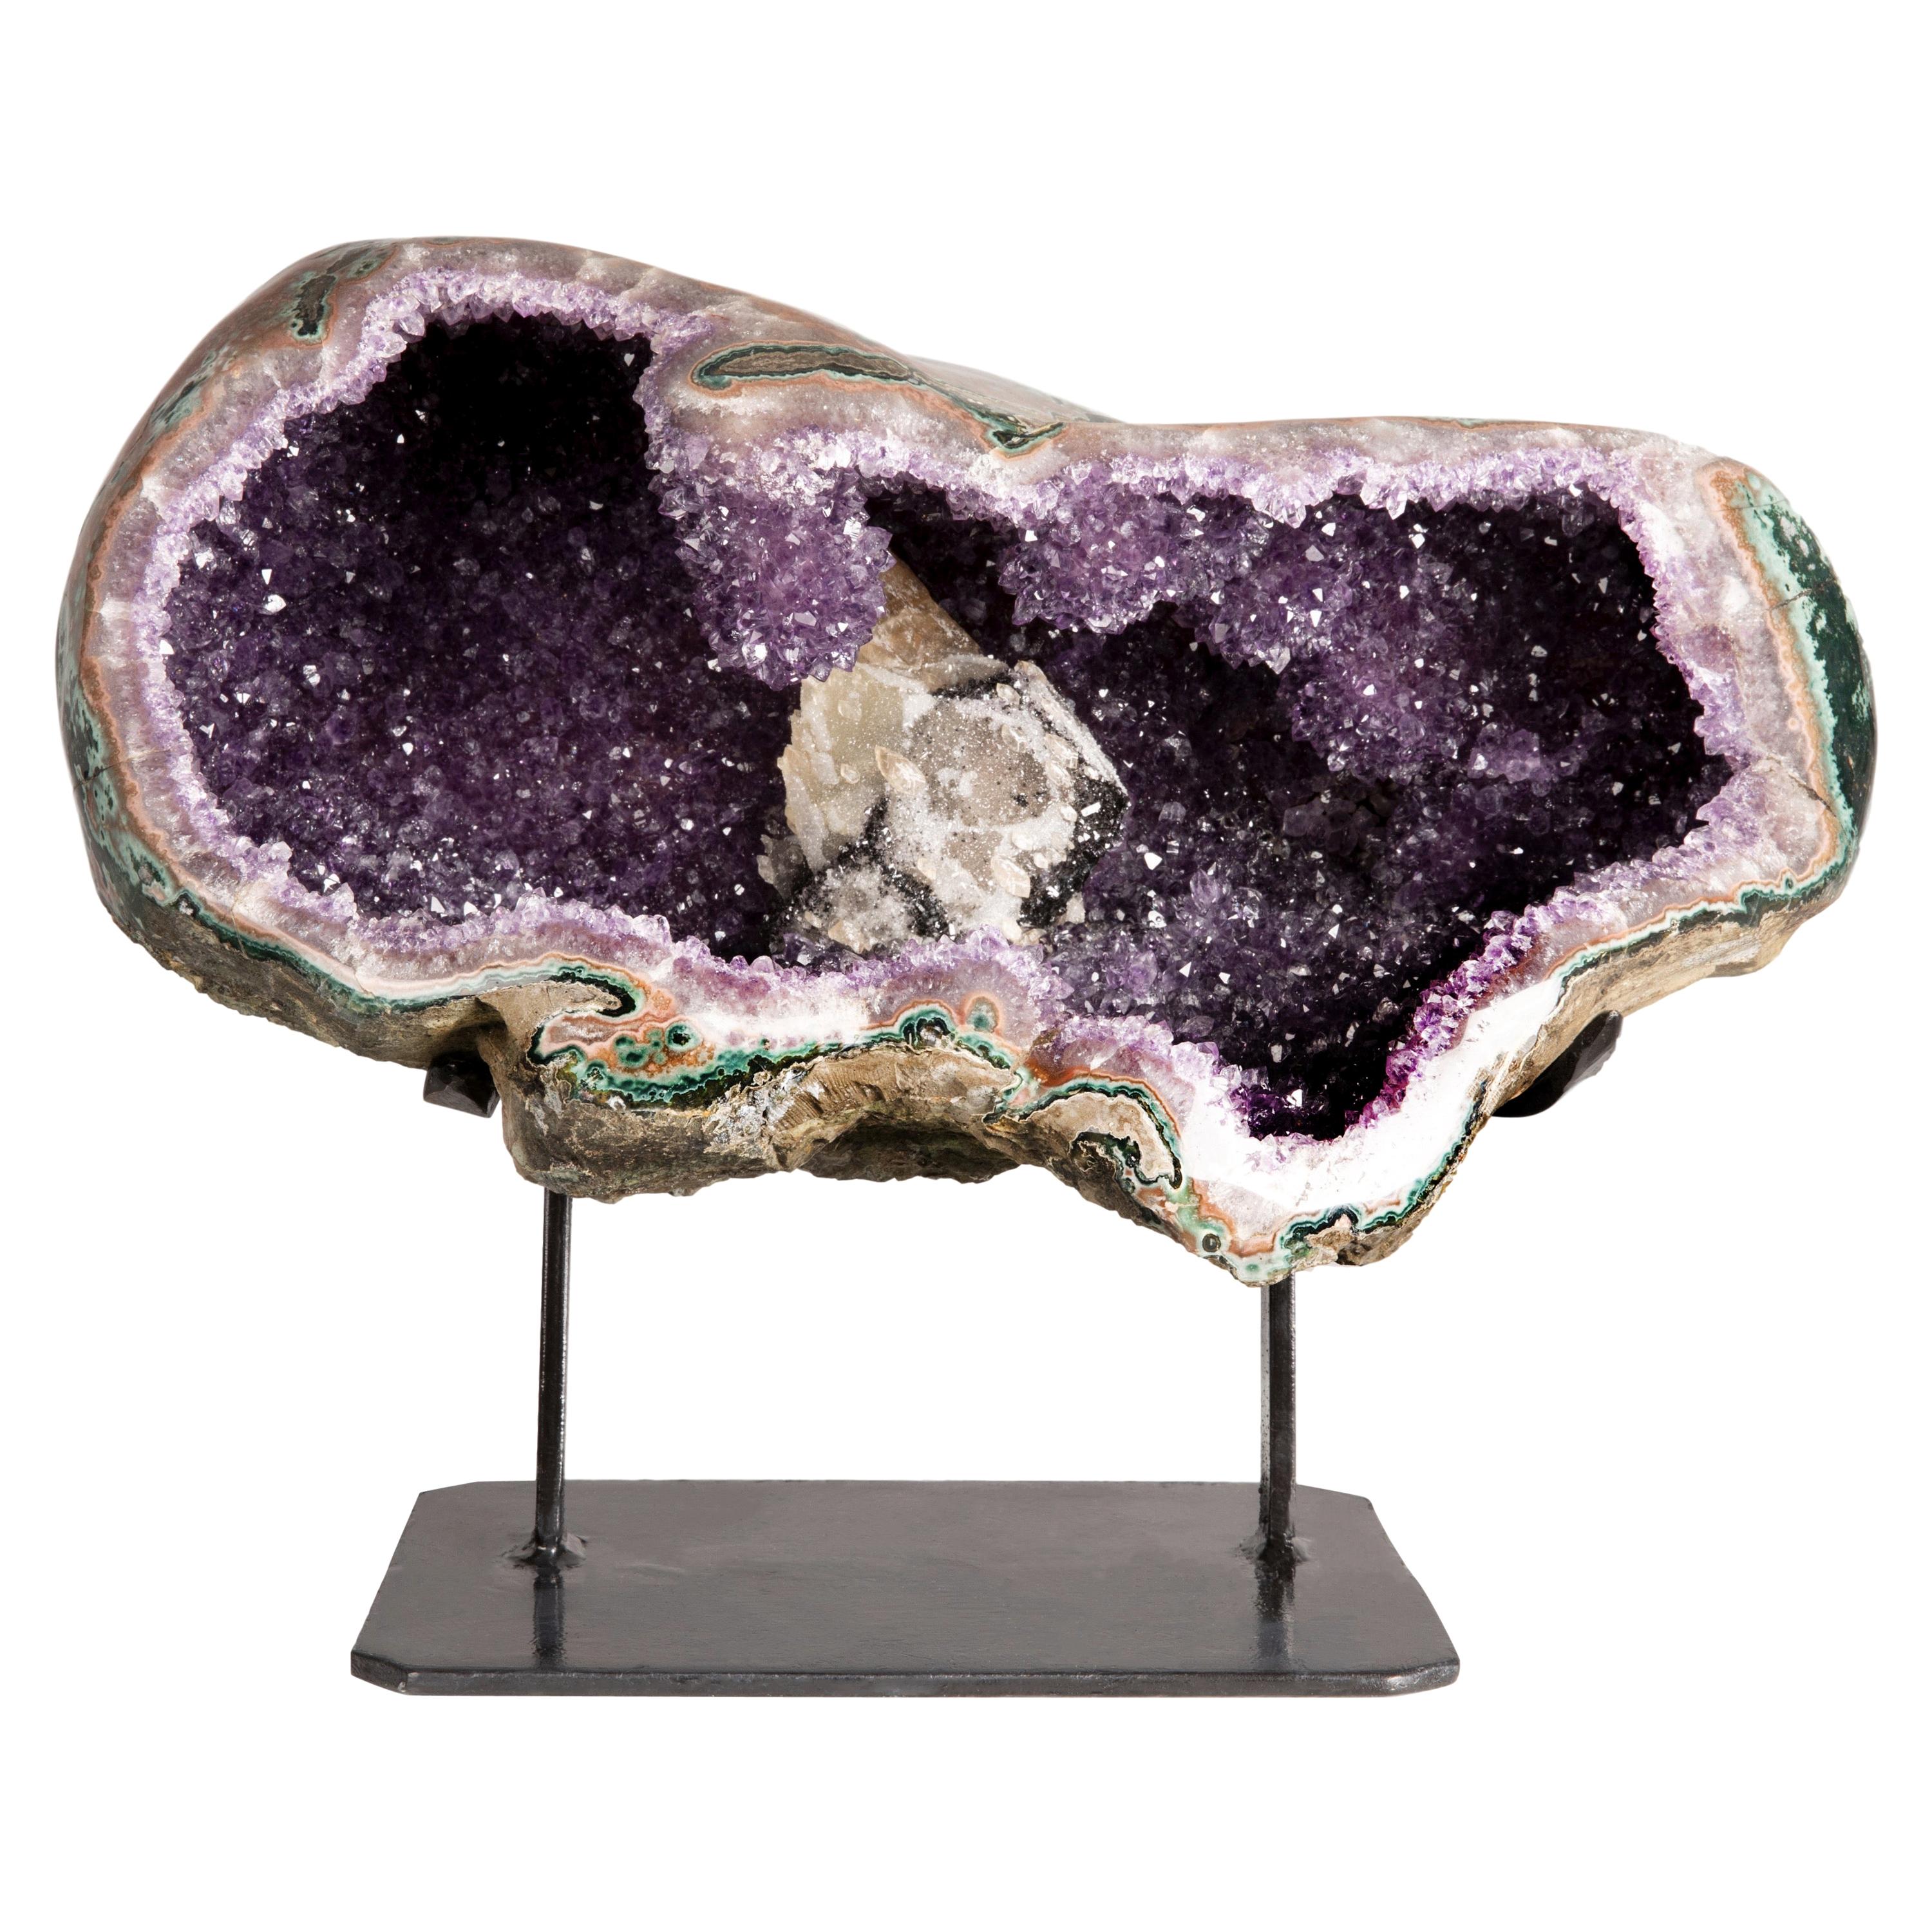 Half Amethyst Geode with Calcite Formation Overlaid by Hematite and White Quartz